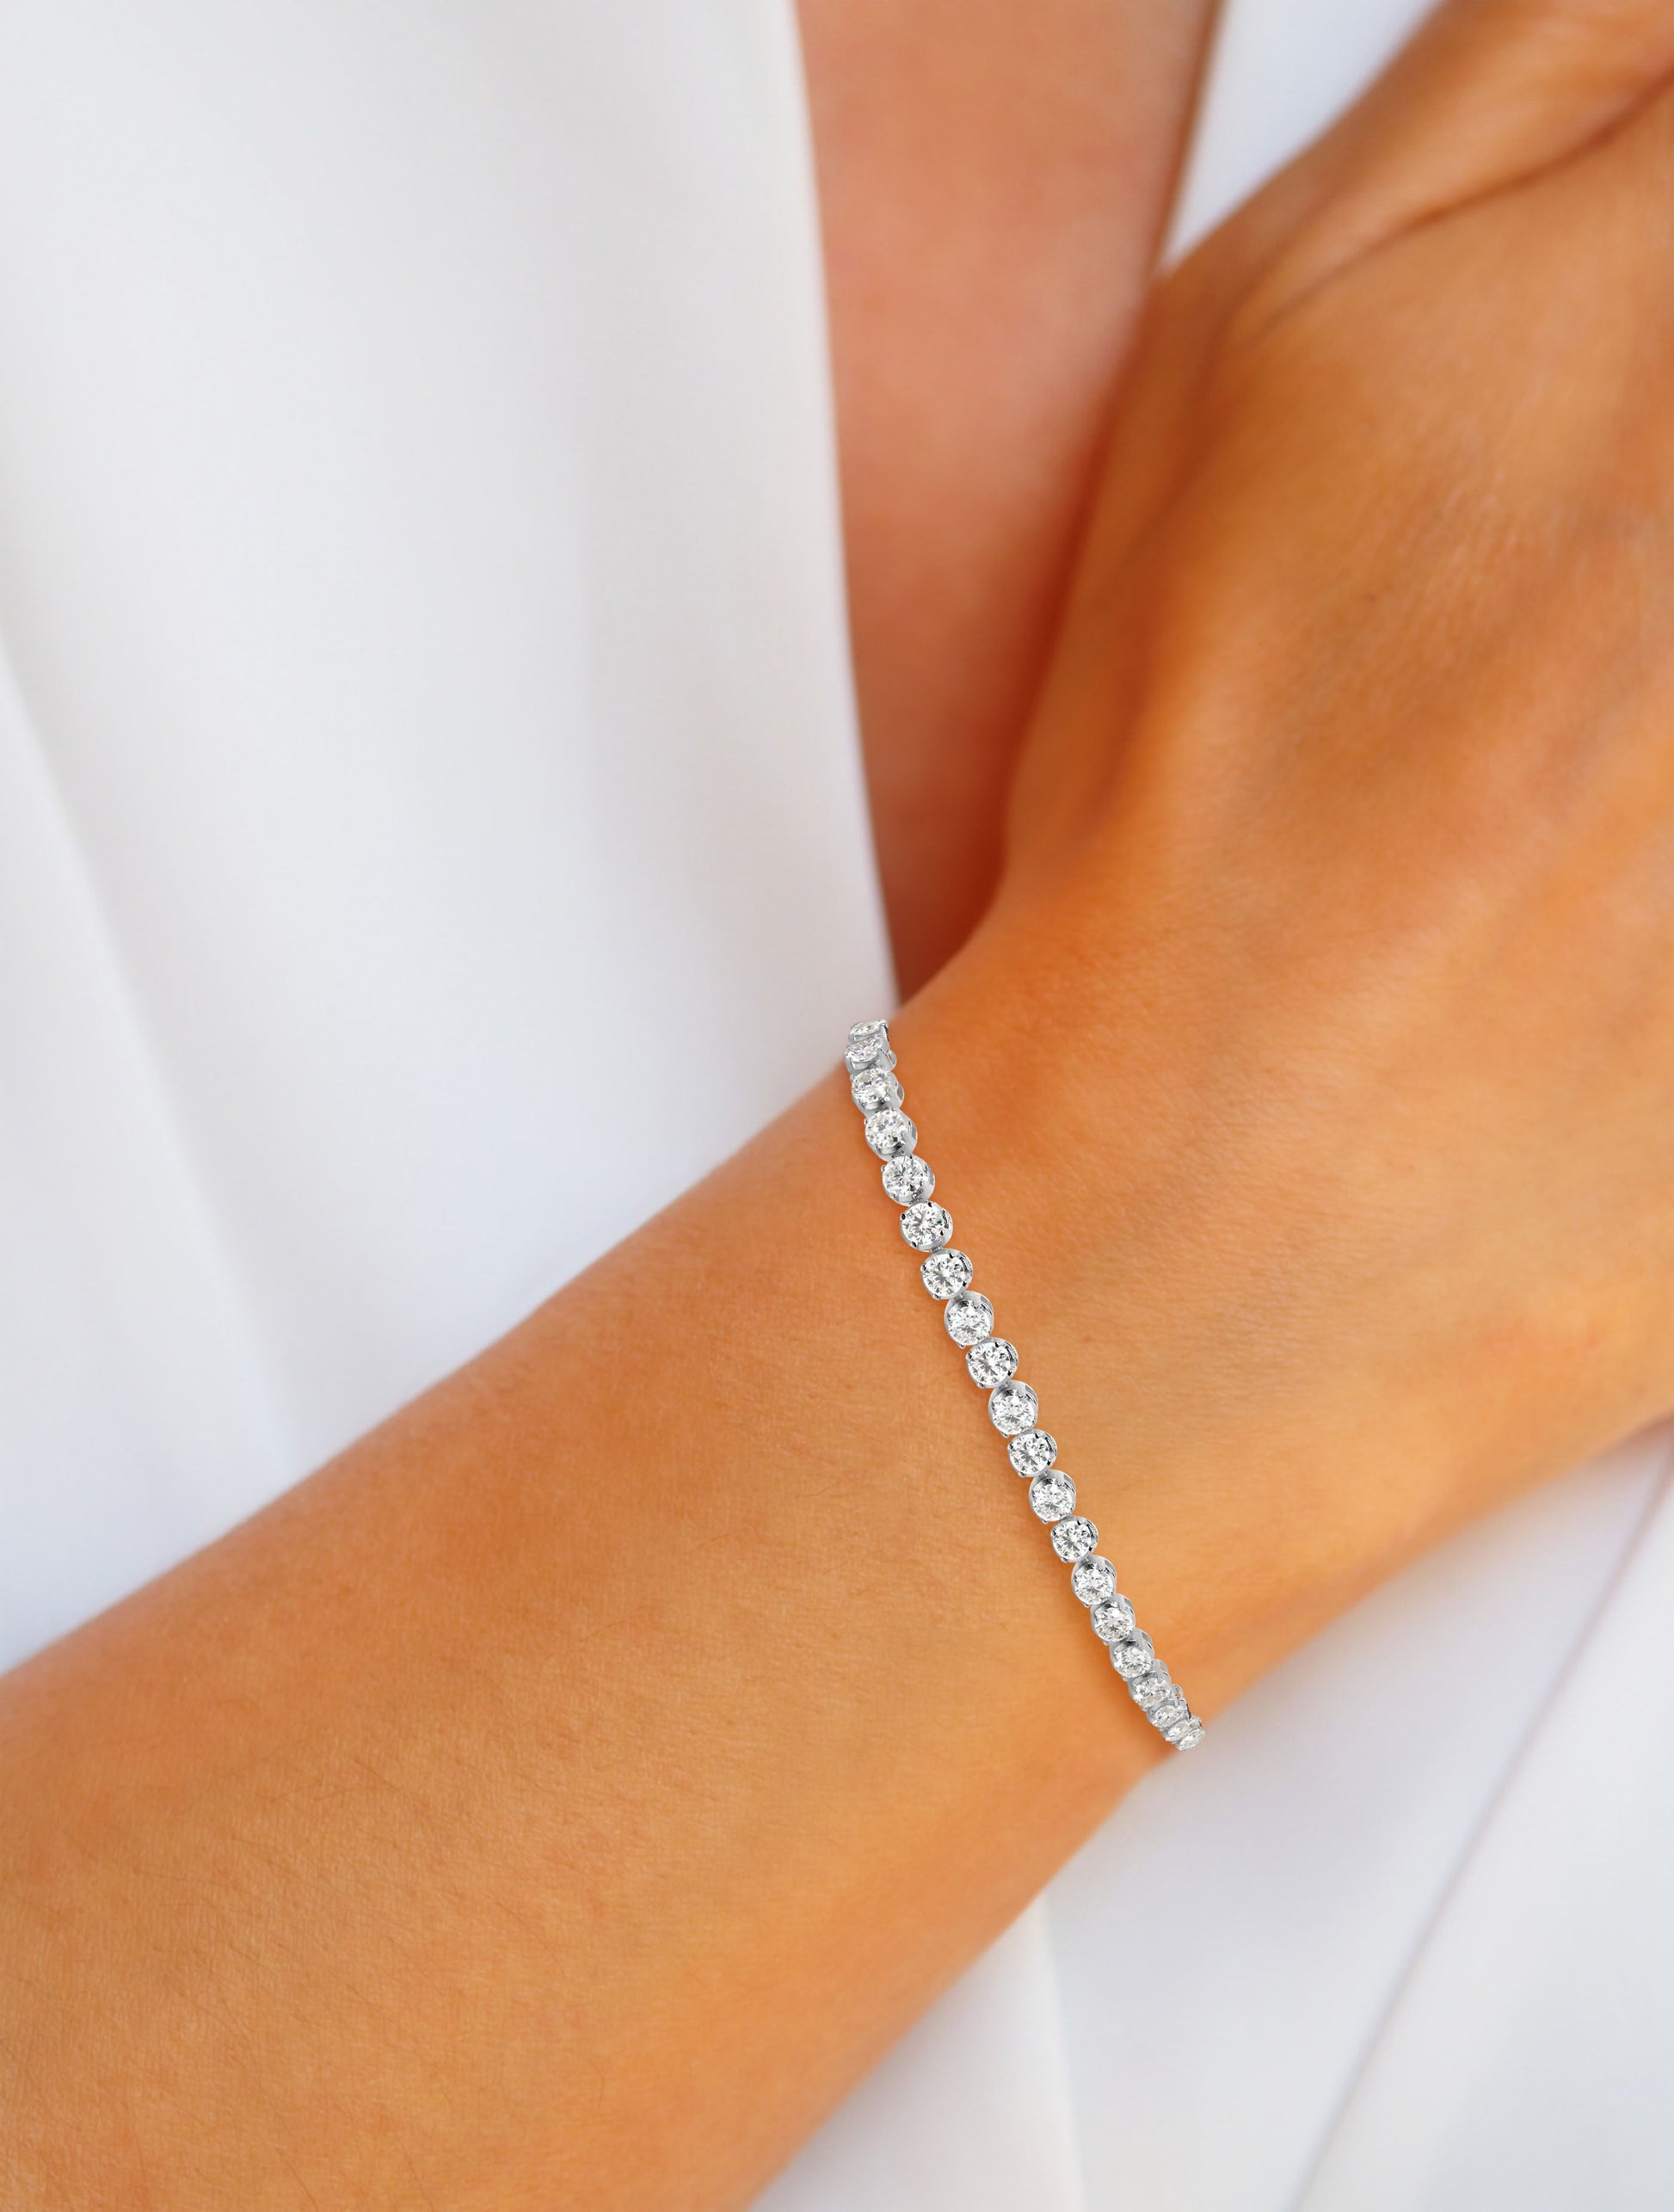 Tennis Bracelet | Moissanite | 4.0 mm | Round Setting | 7.0 Inches | 925 Sterling Silver with Platinum Plating or 24K Gold Plating - Adora Fine Jewelry